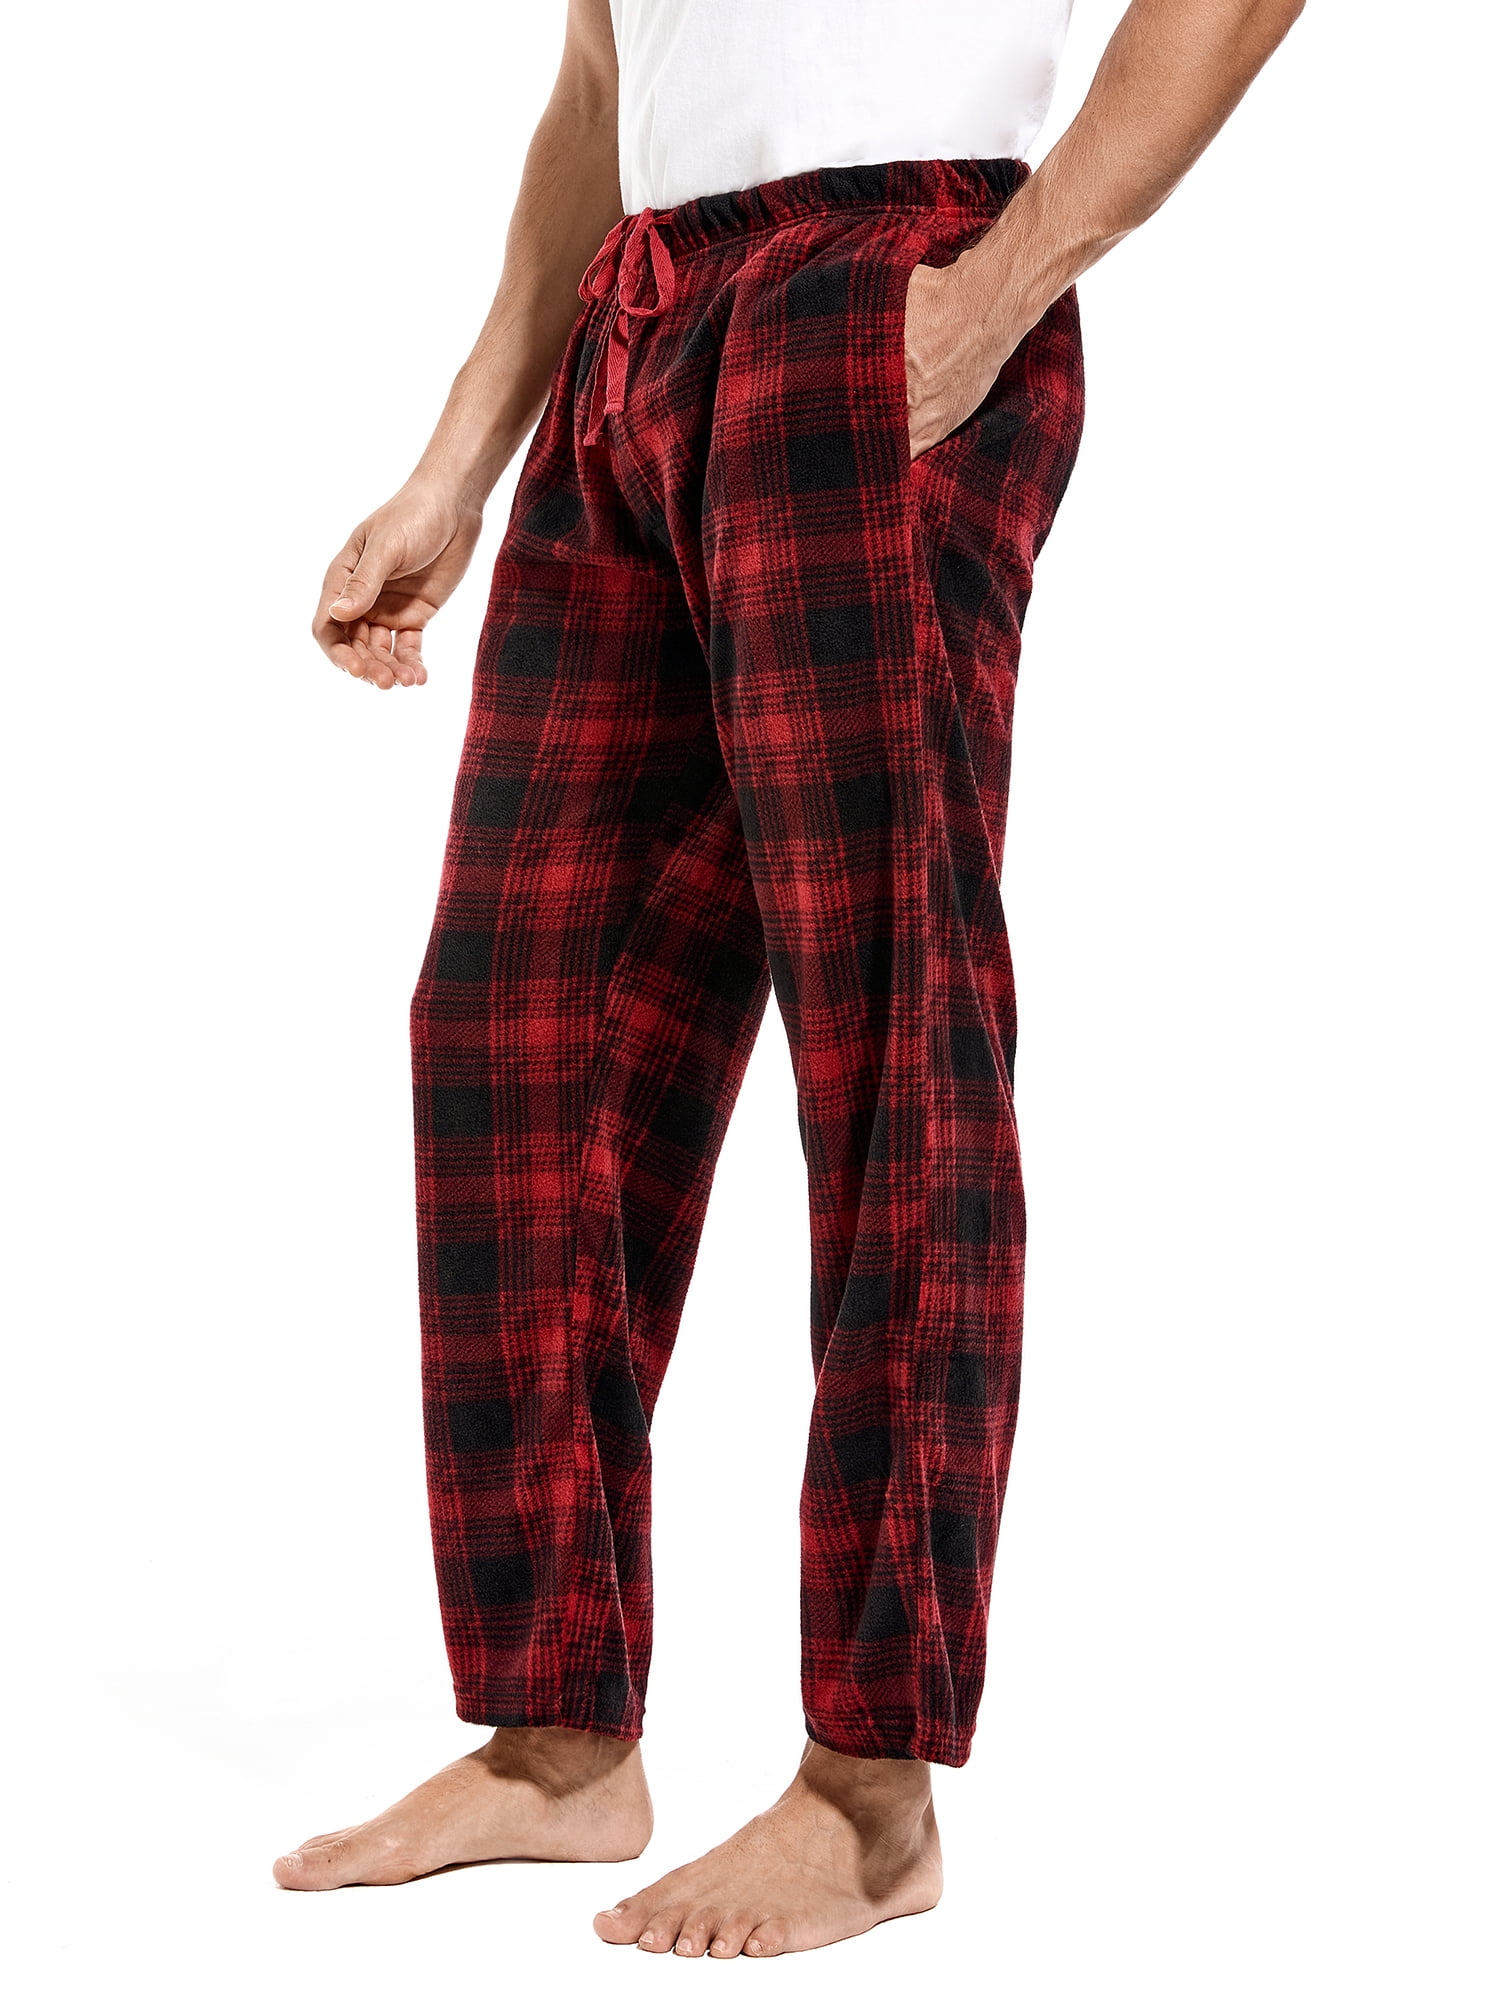 Leveret Mens Fleece Pants Striped Red and White XXL 